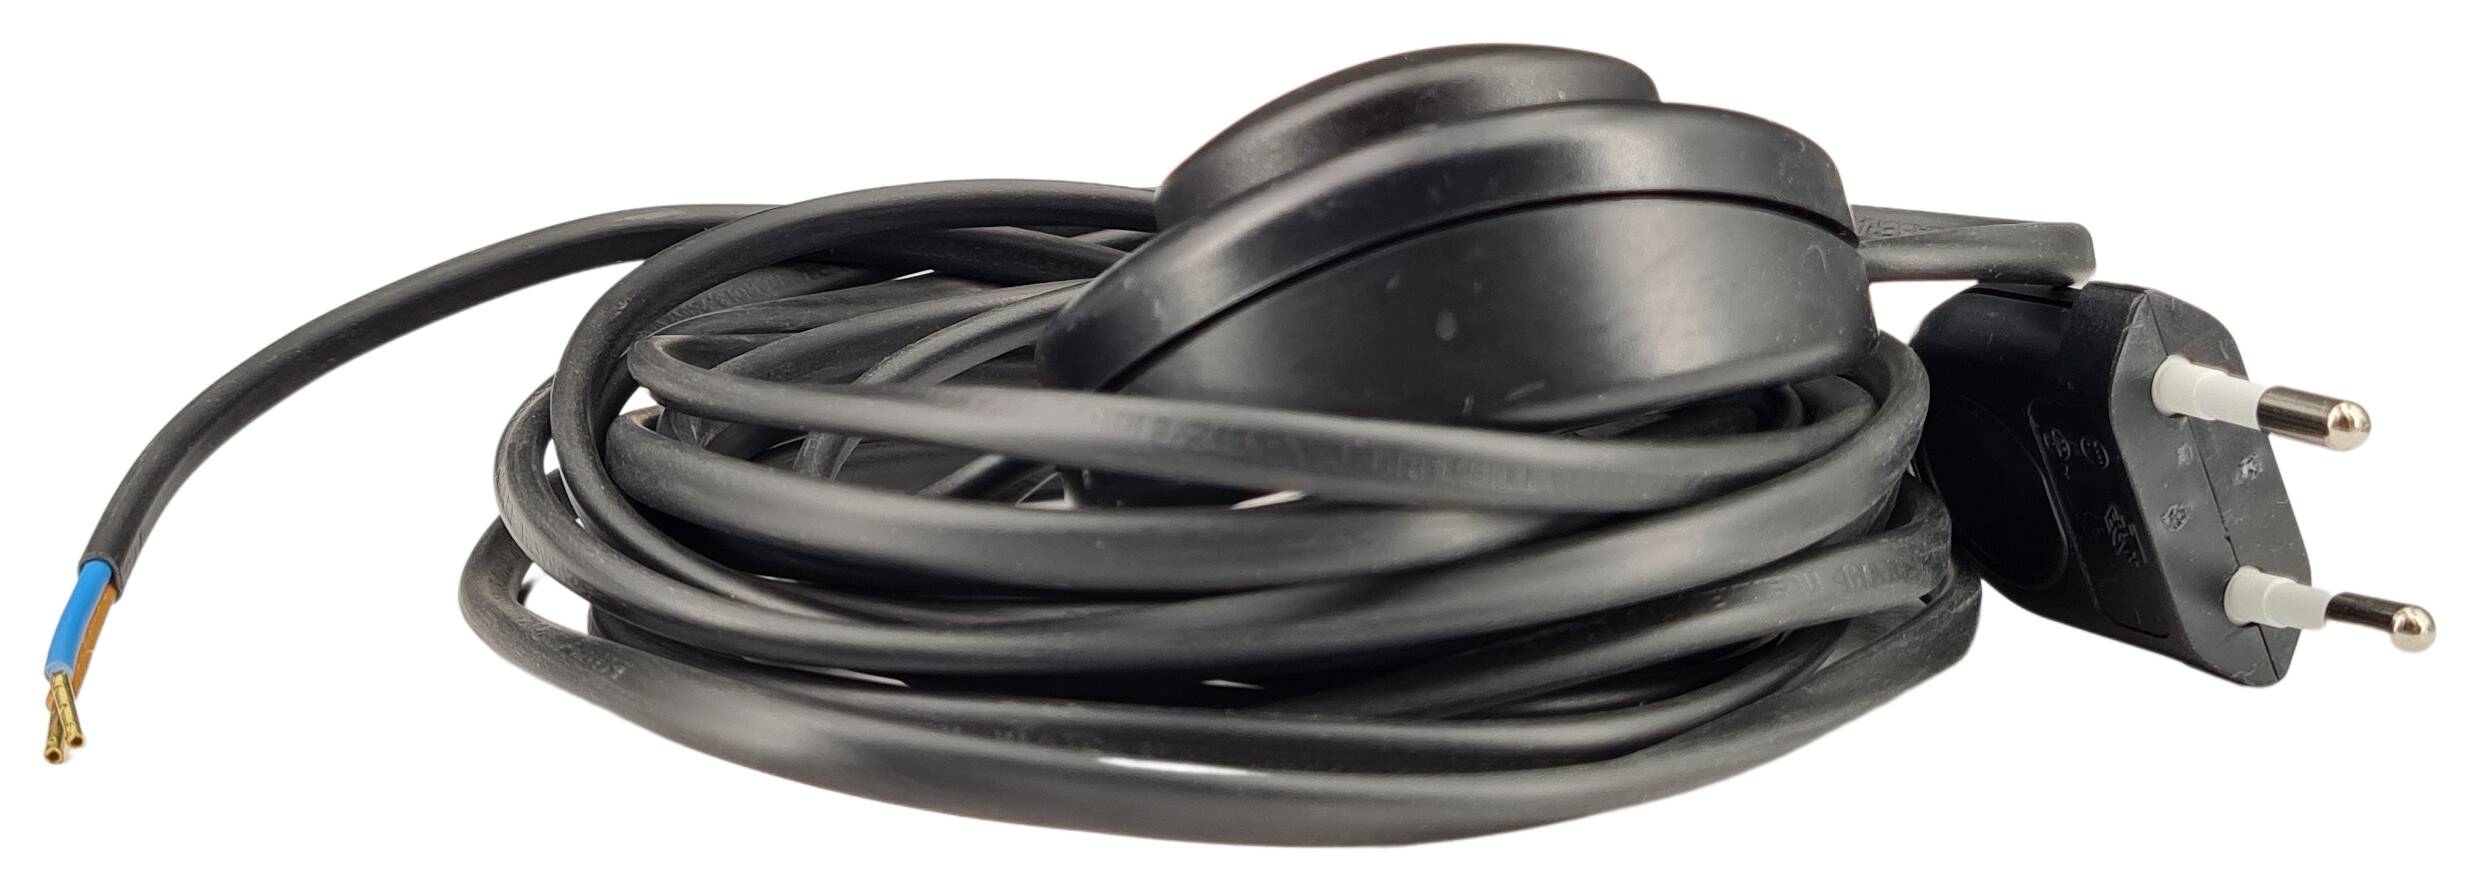 cord-set 2x0,75/4500/2500 flat with Foot switch 350 round and Euro plug black